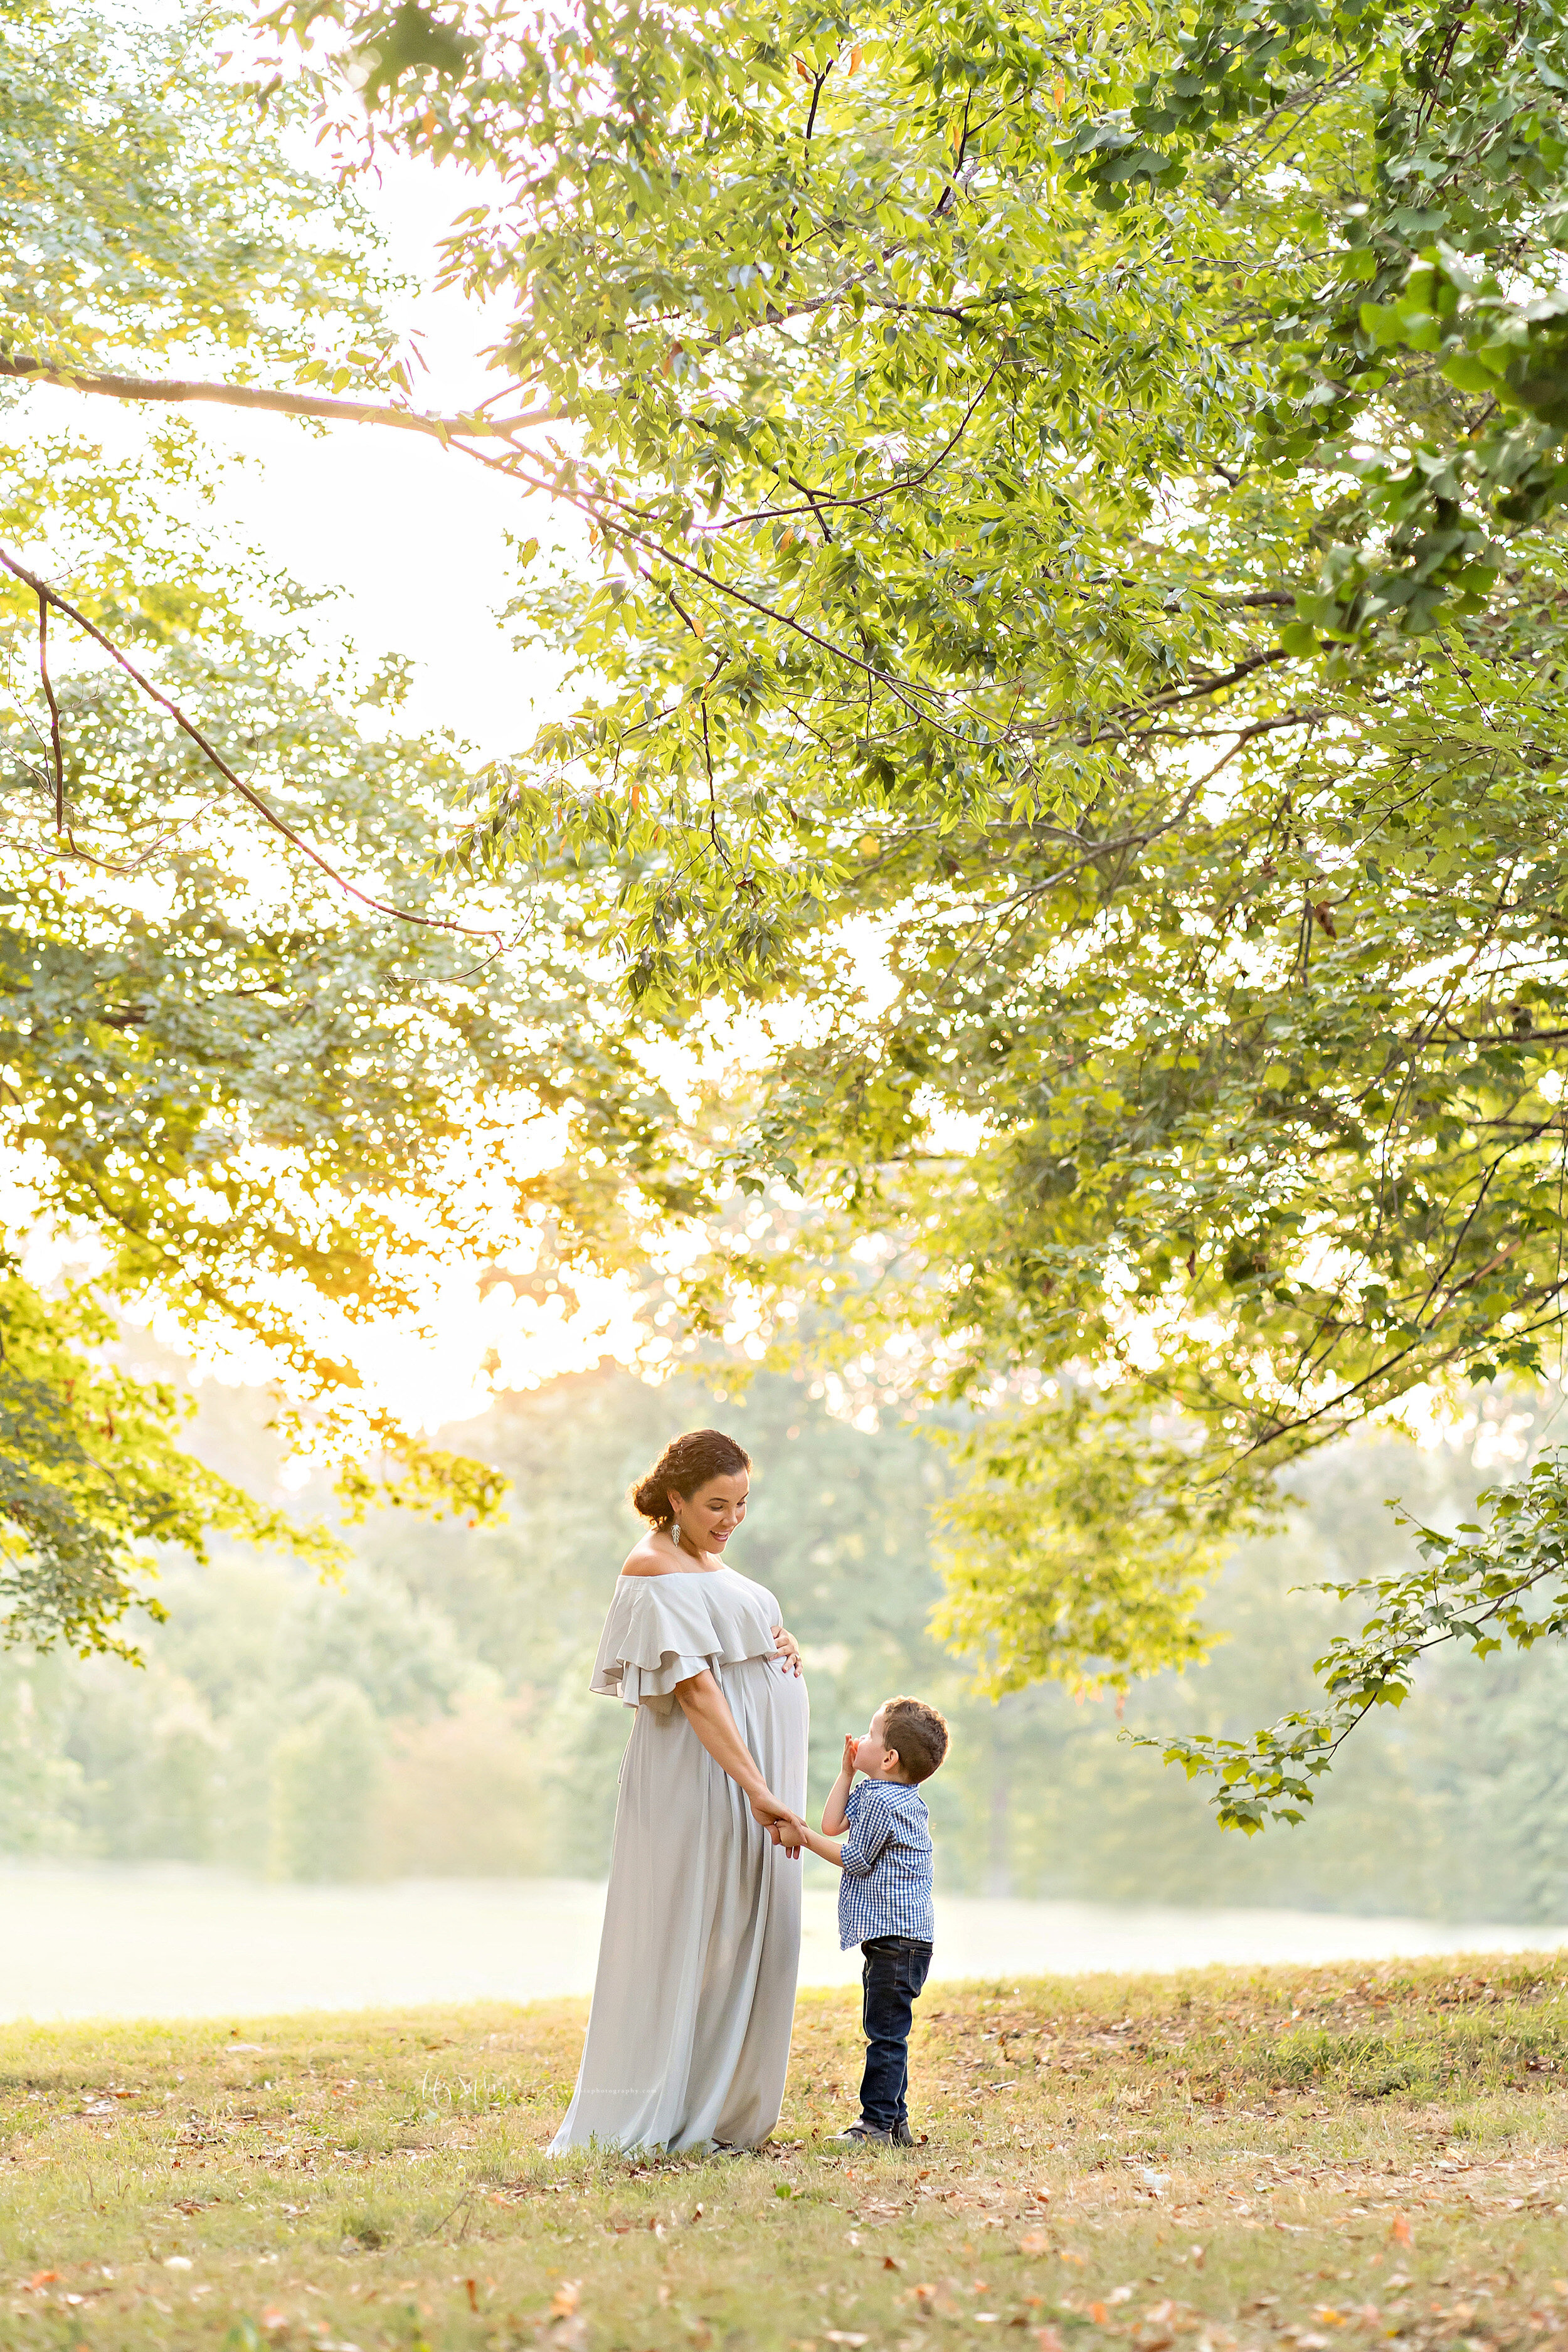  Maternity photo of a mom and her son next to a lake in an Atlanta park at sunset taken in natural light. 